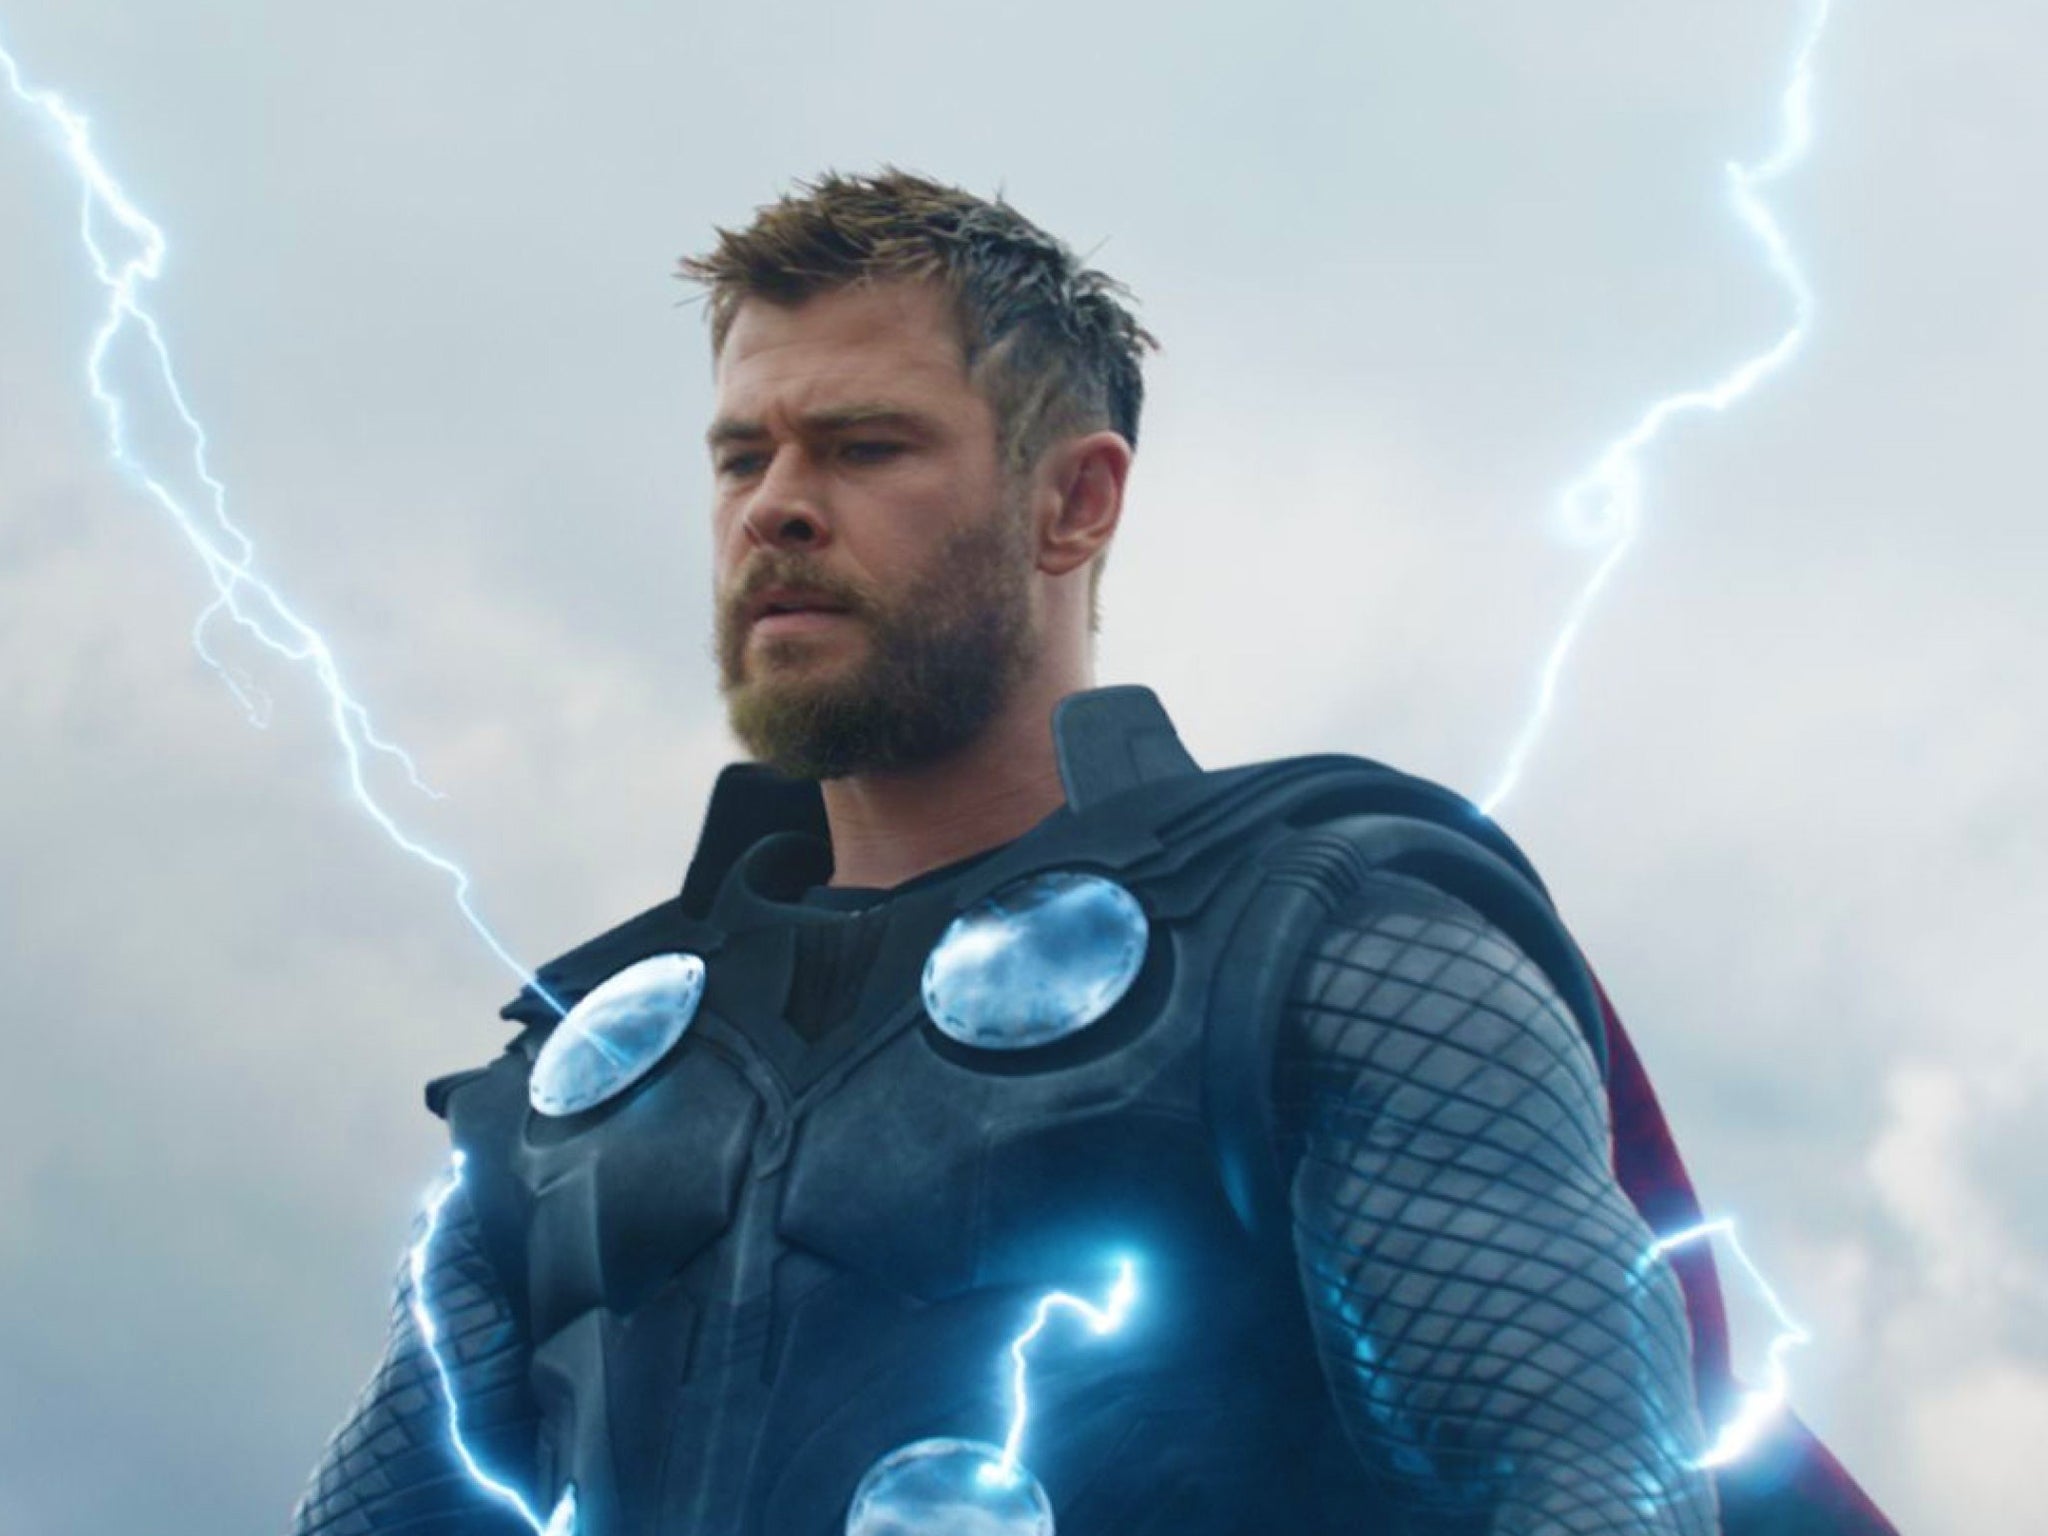 Chris Hemsworth, who is reported to be planning to step back from acting in the coming years